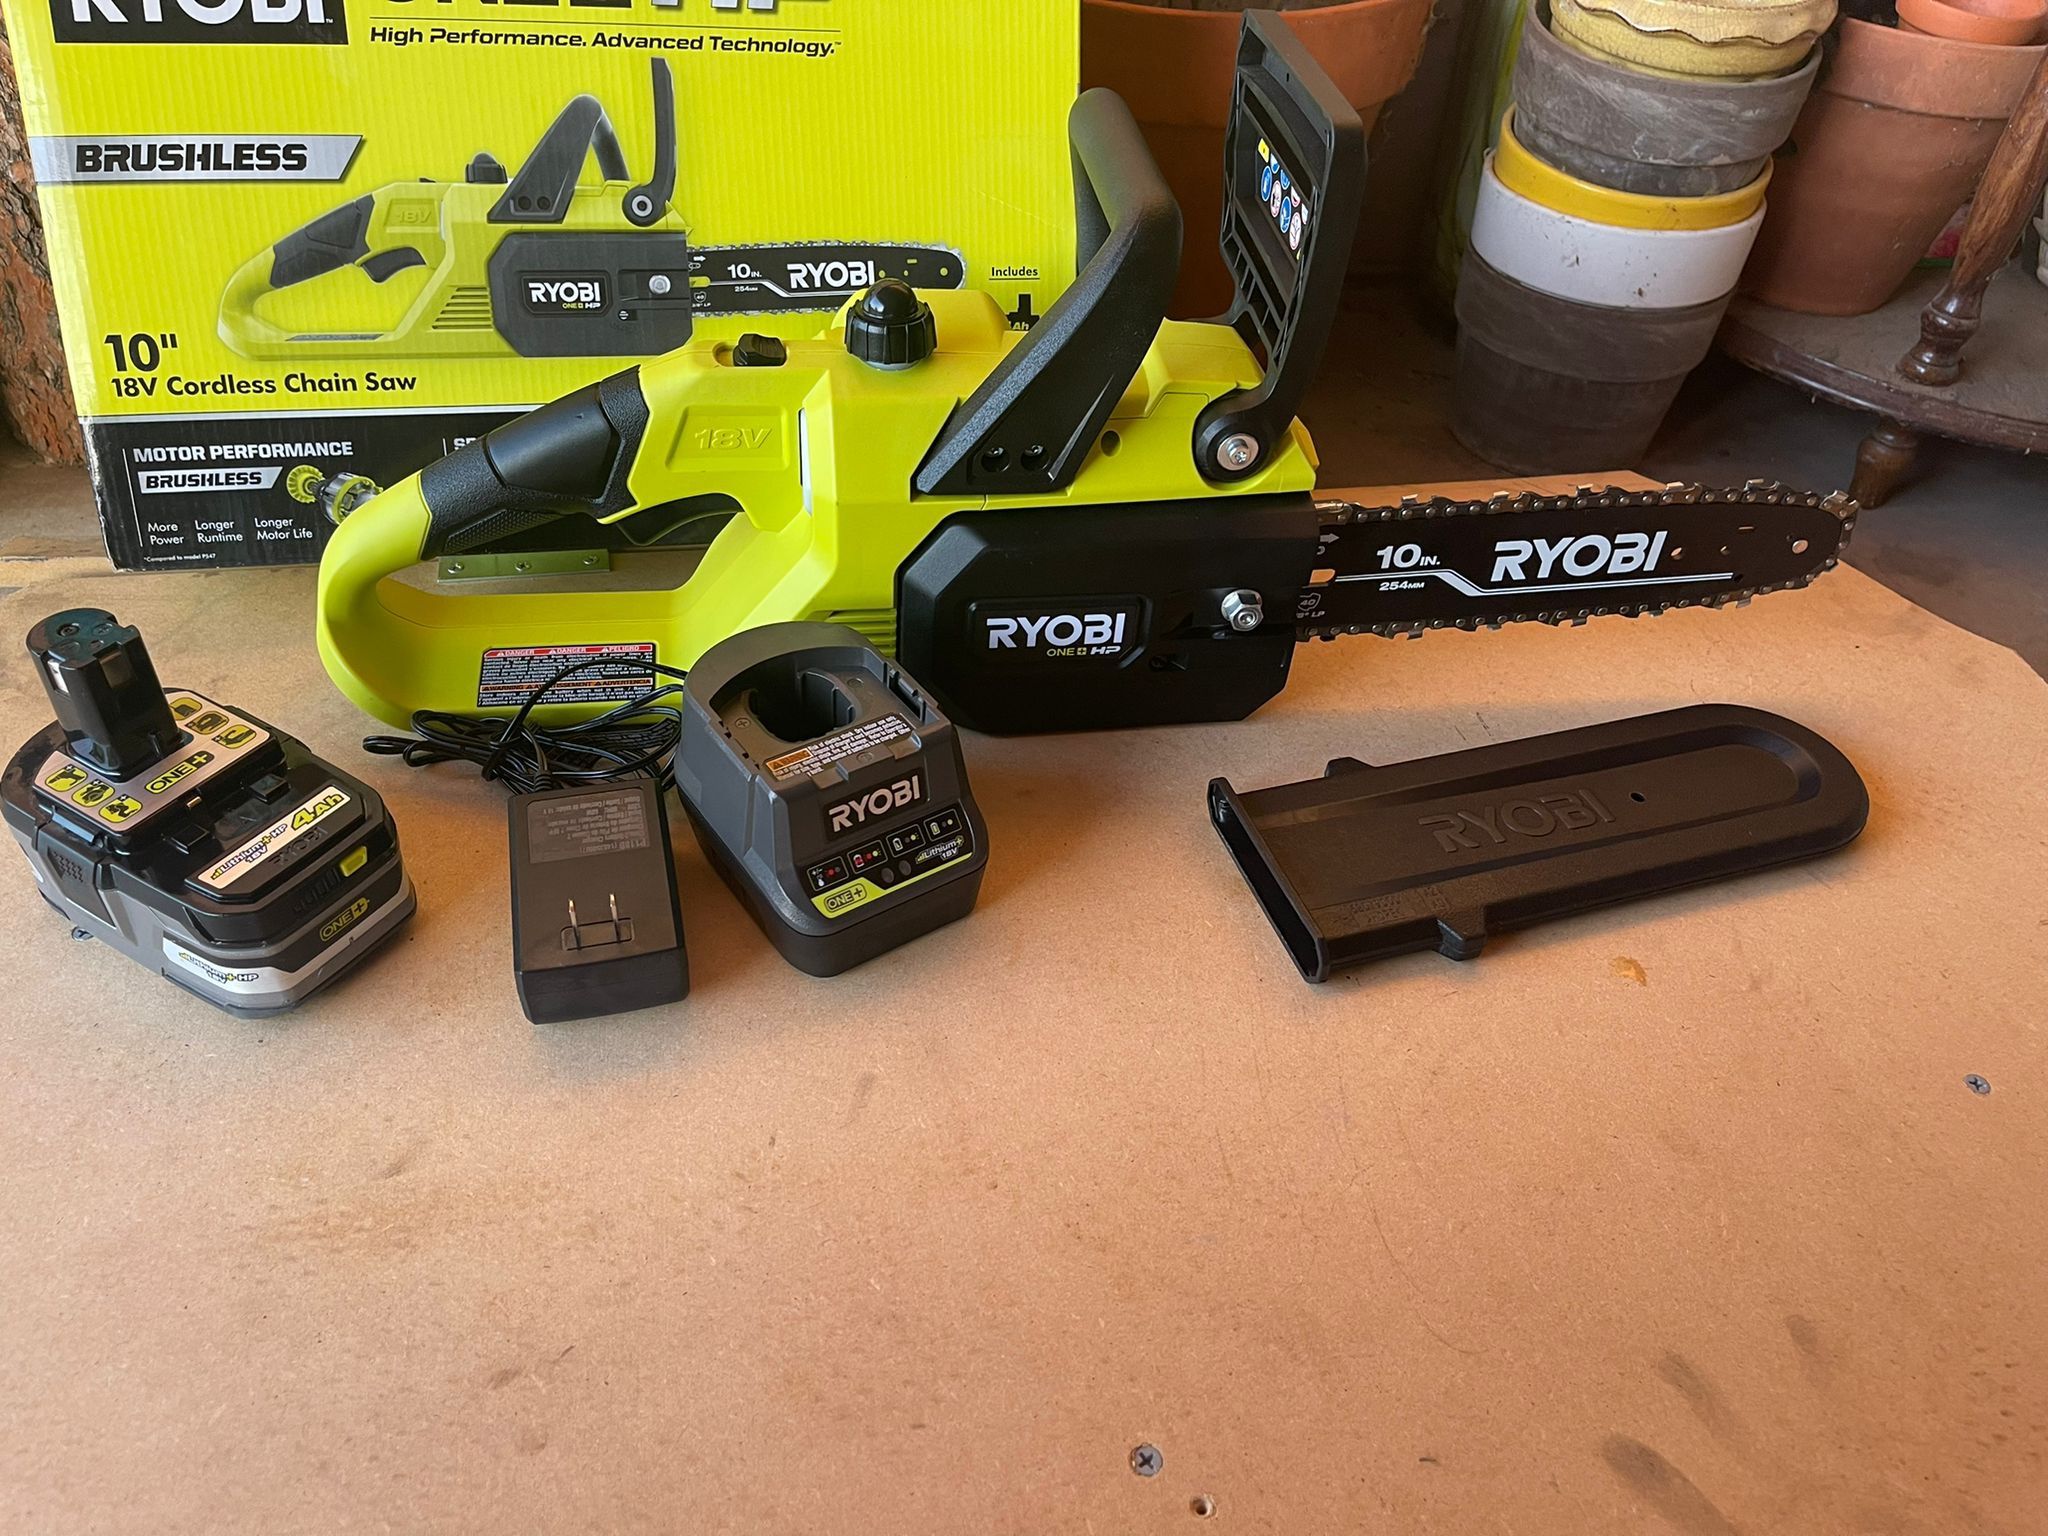 RYOBI ONE+ HP 18V Brushless 10 in. Cordless Battery Chainsaw with 4.0 Ah Battery and Charger